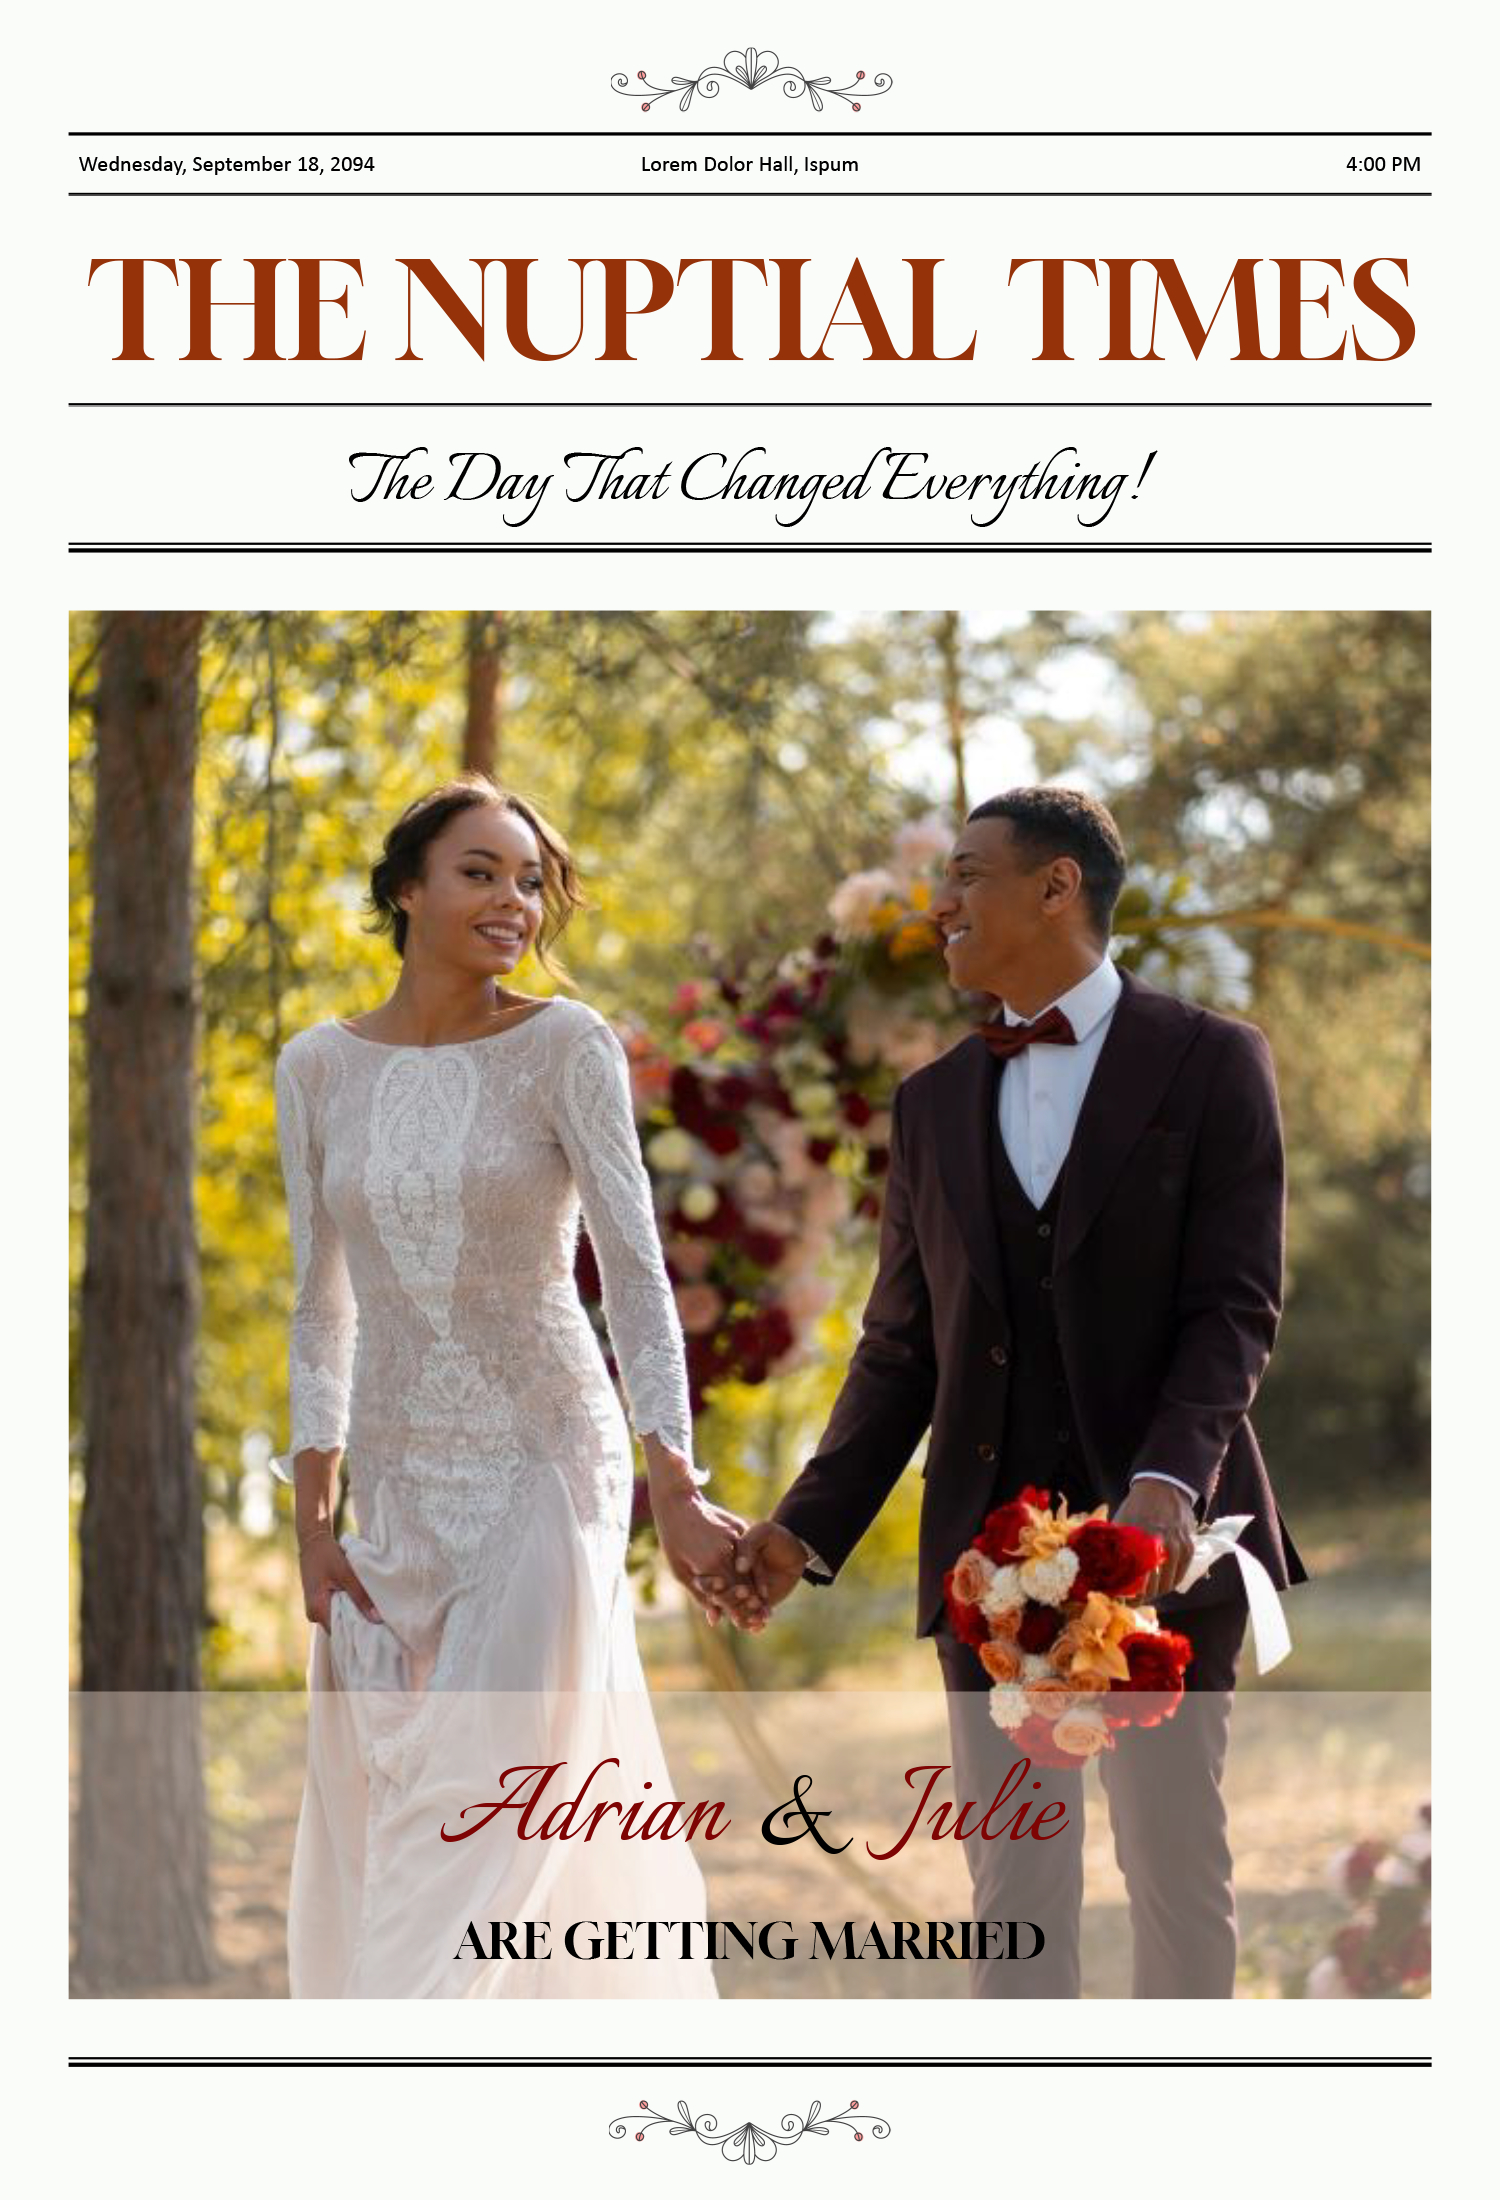 Large Page Wedding Newspaper Template - Front Page